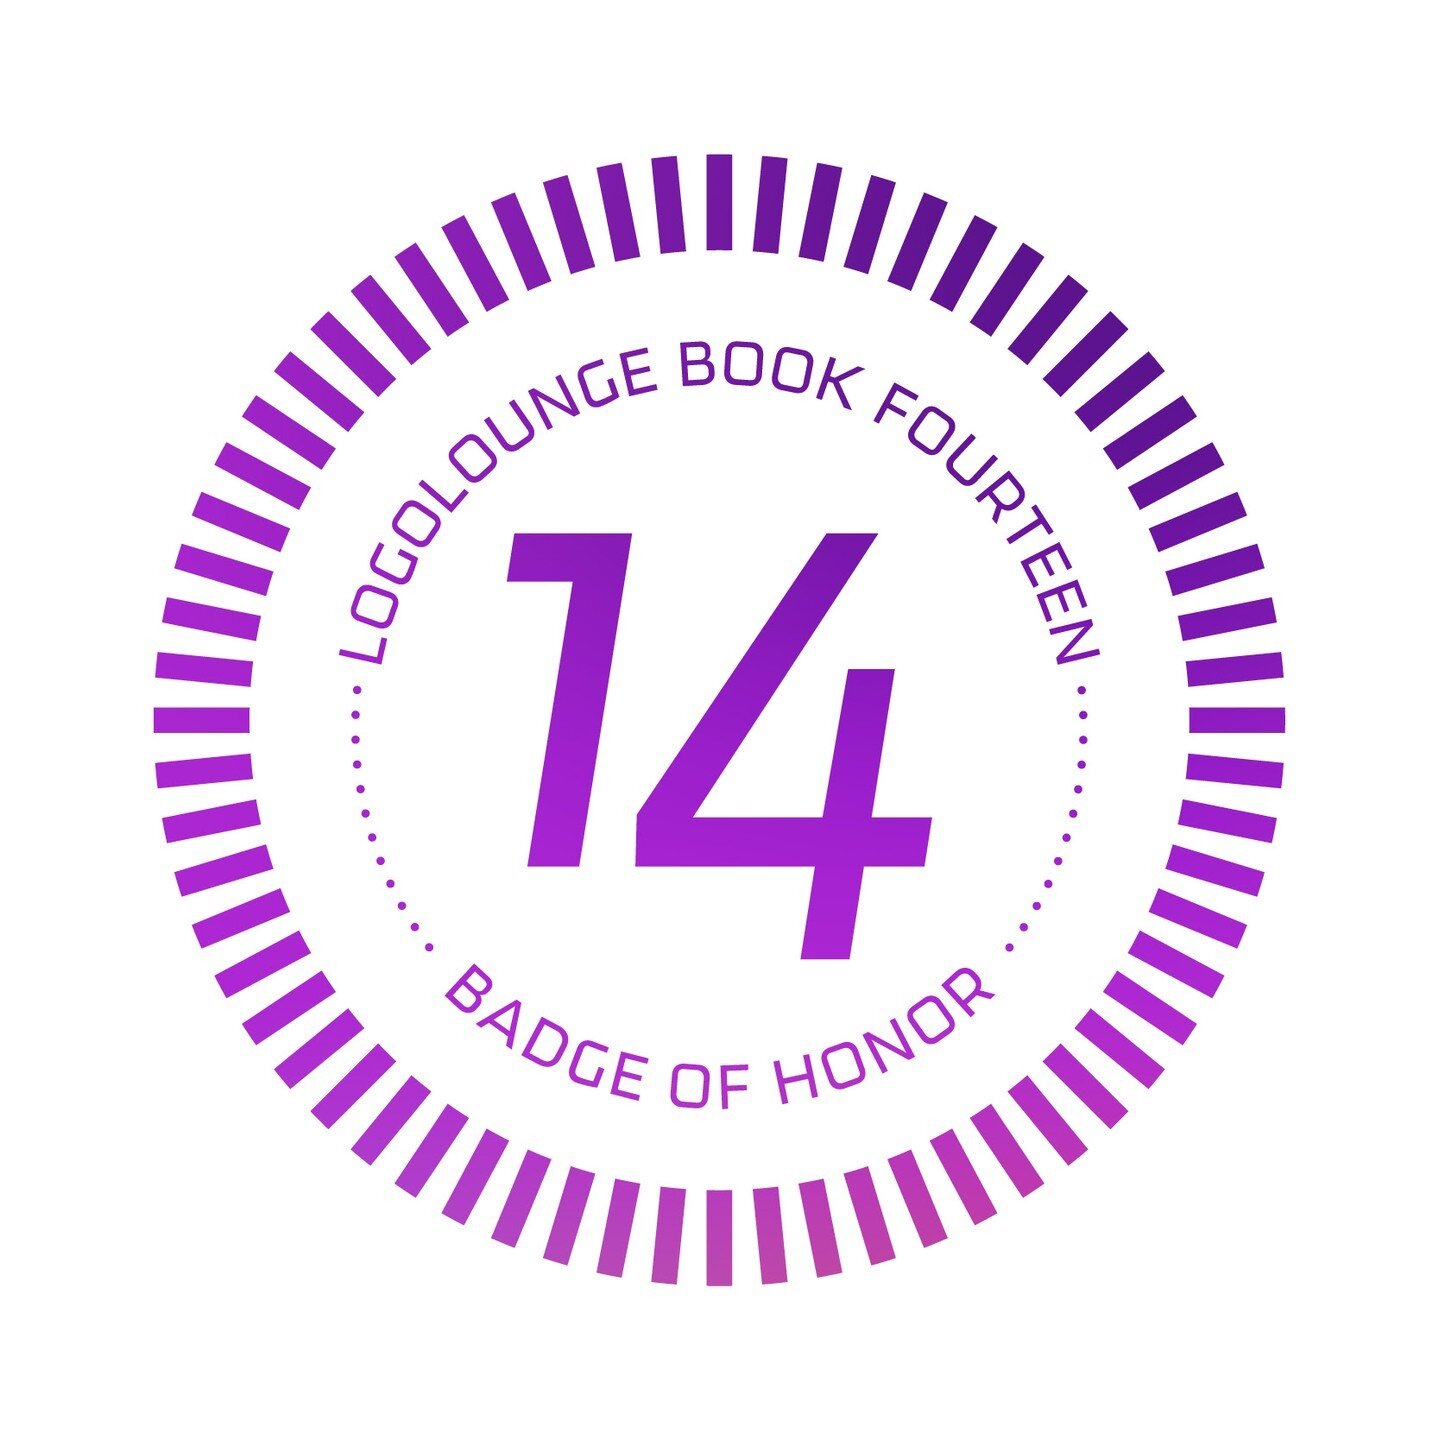 Pumped to share some good news! BPD's work has been chosen for LogoLounge Book 14! 📚🎉 

Out of thousands of submissions, these 2 marks made the cut -- thanks to a panel of industry experts who reviewed over 30,000 logos. 😊

I'm grateful for the re